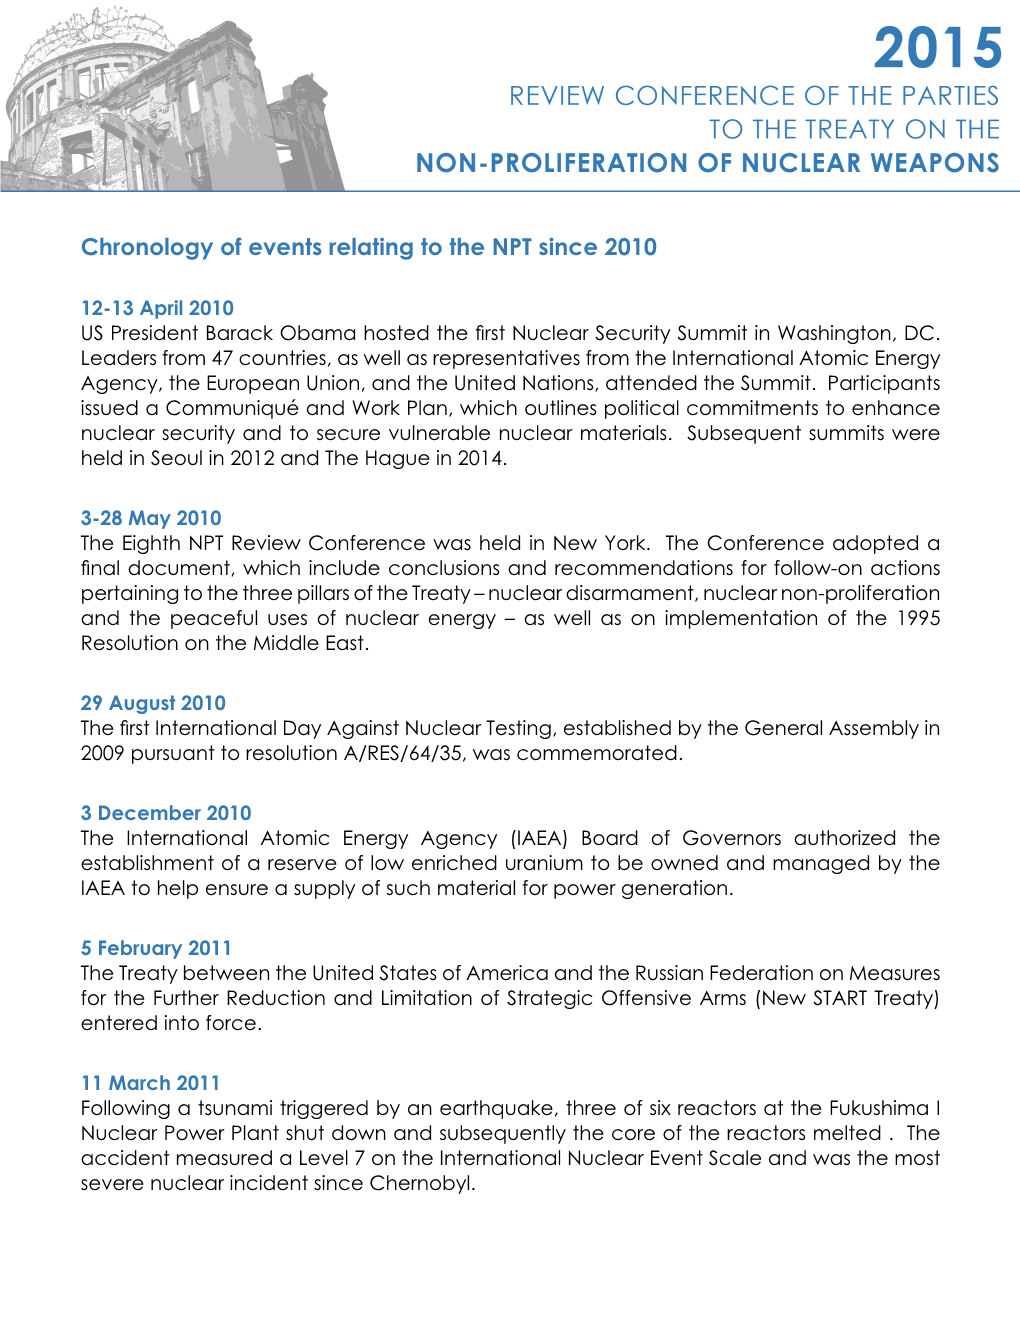 Chronology of Events Relating to the NPT Since 2010